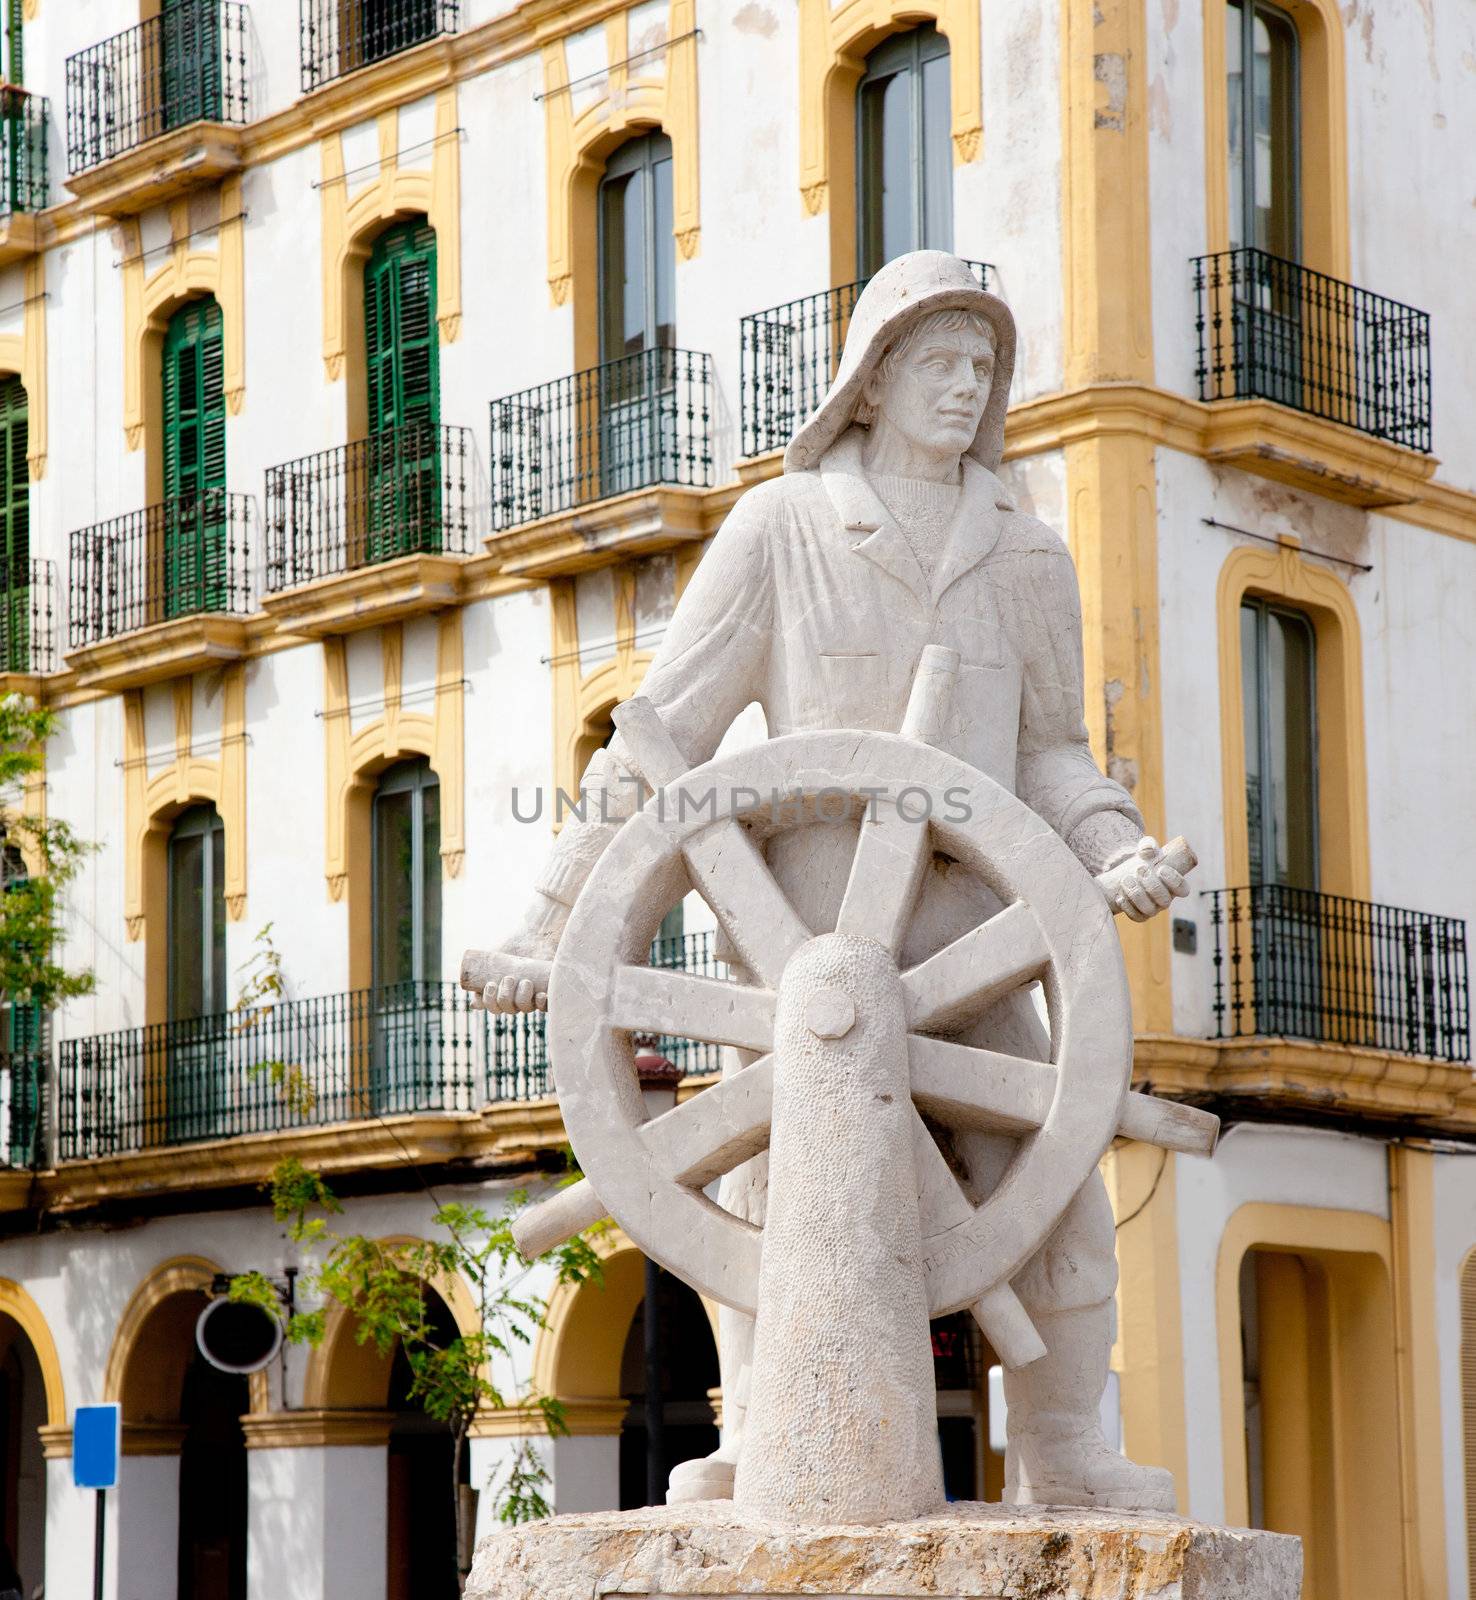 Eivissa ibiza town statue dedicated to all sailor and sea people